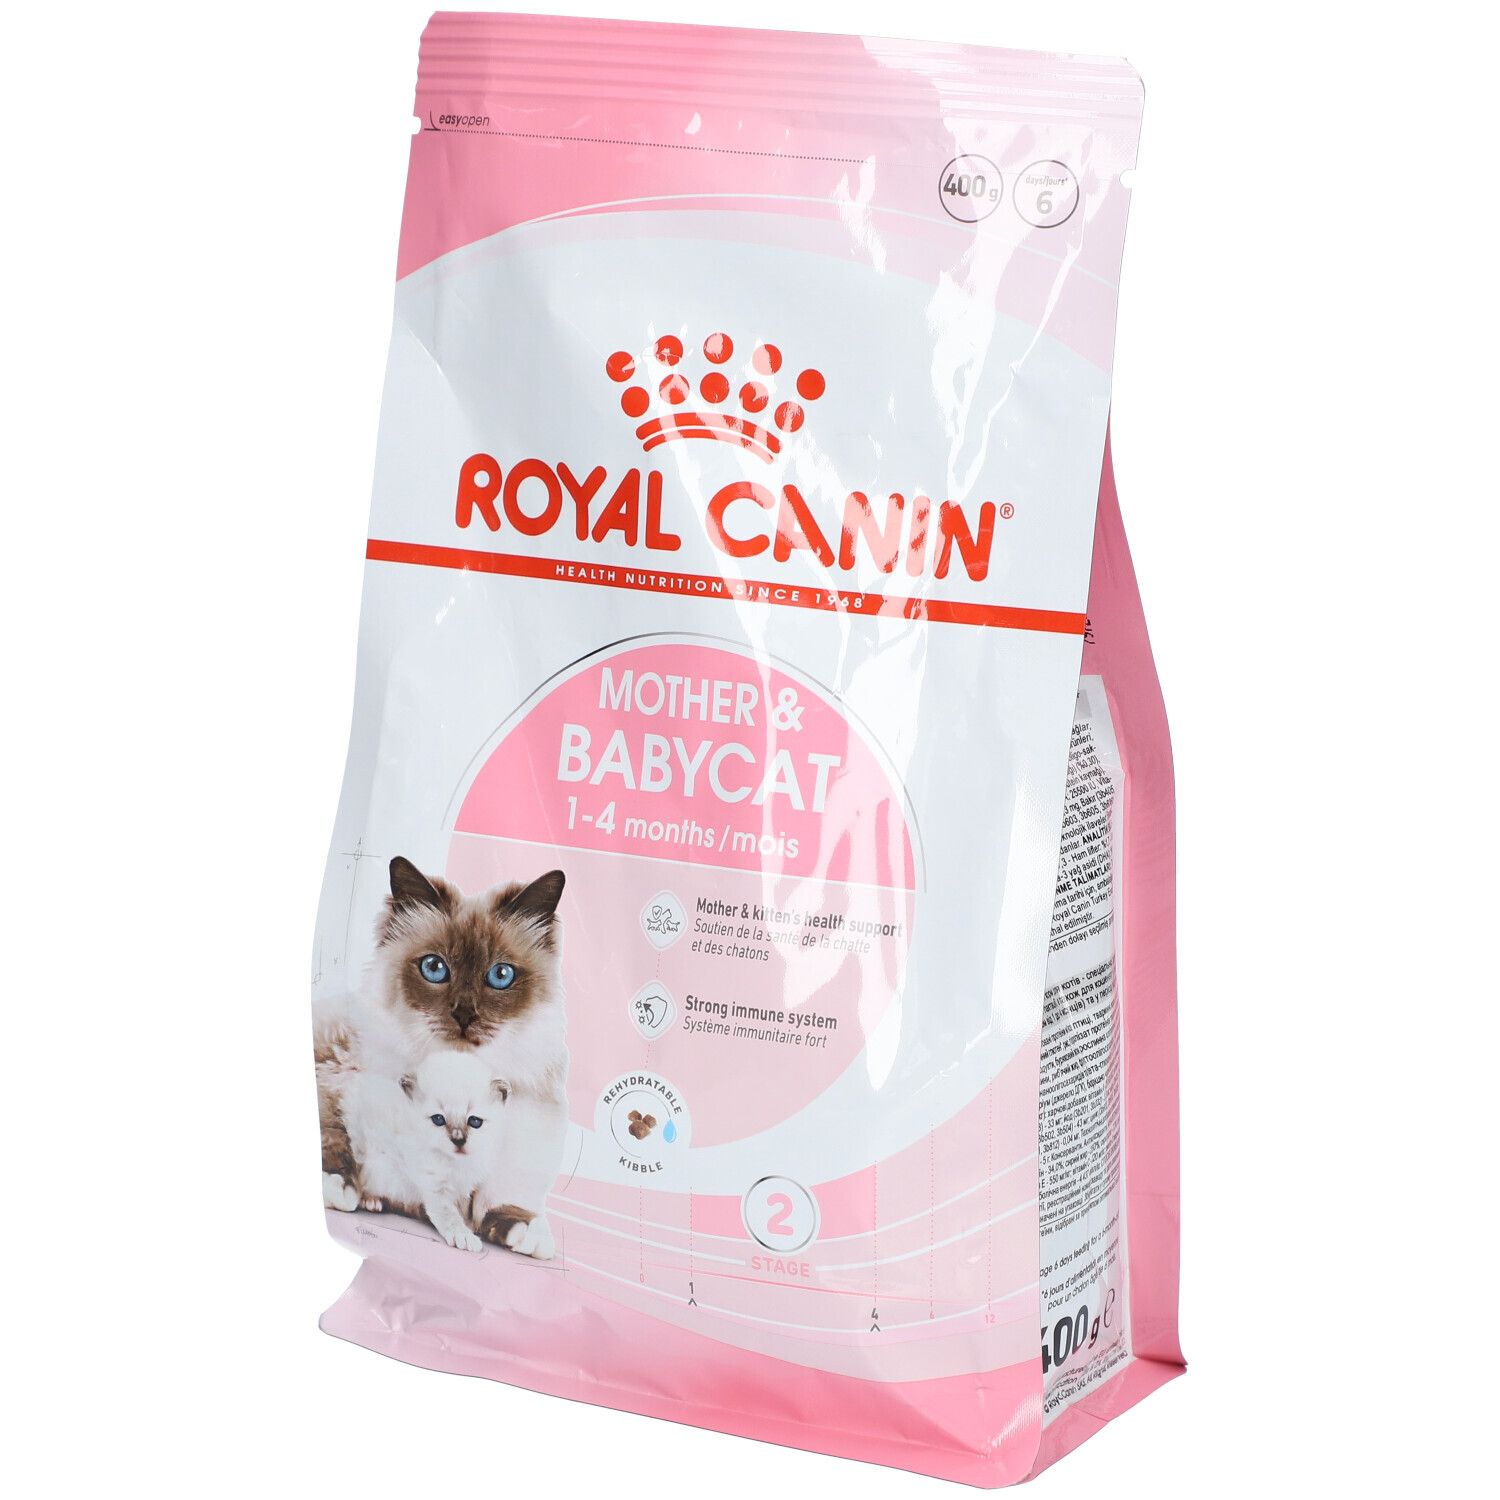 ROYAL CANIN Mother & Babycat pour chatte et chaton 400 g Aliment